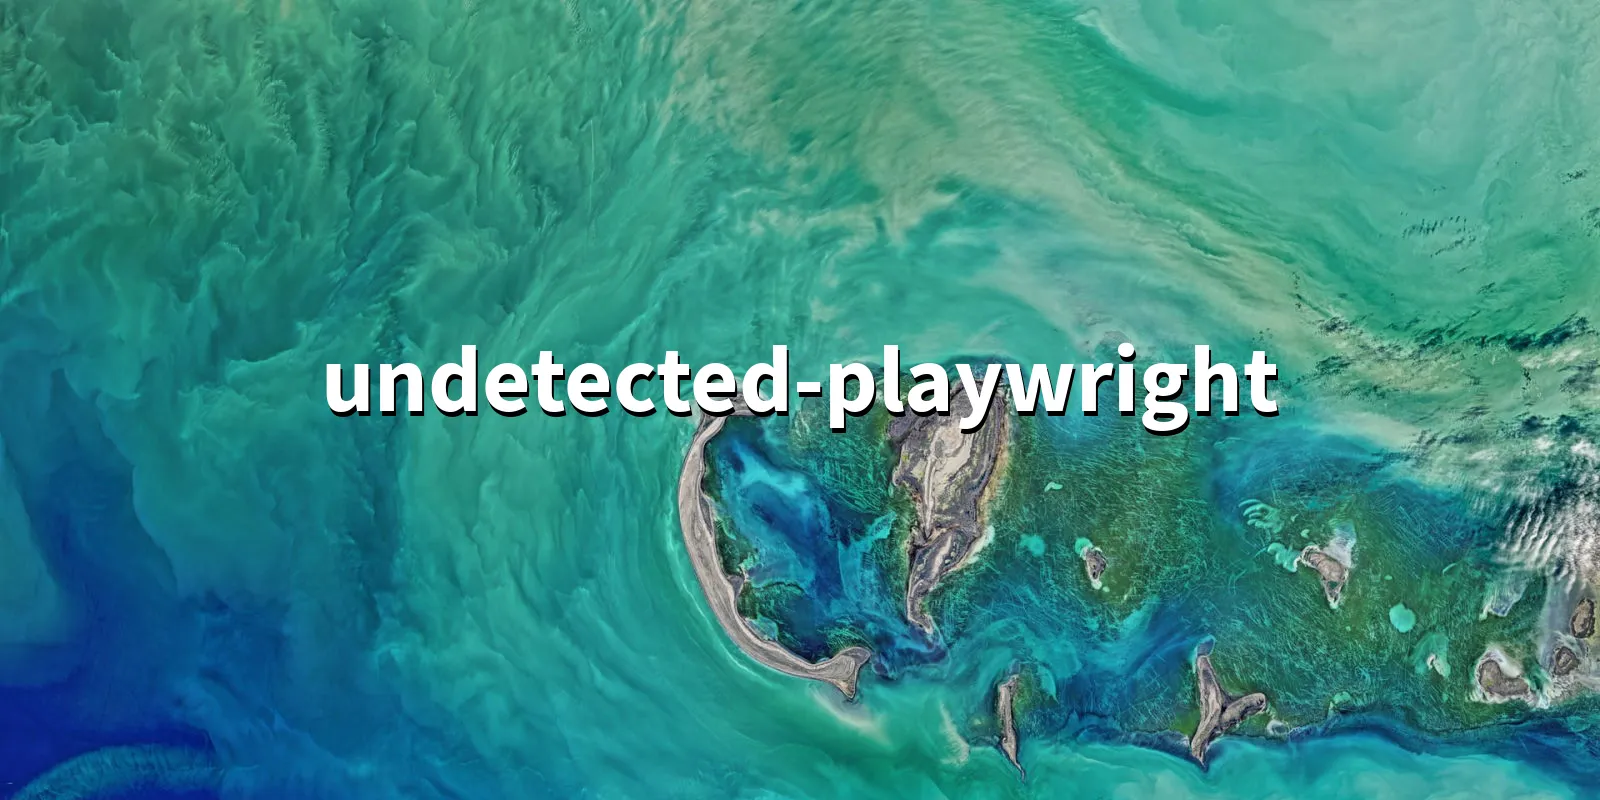 /pkg/u/undetected-playwright/undetected-playwright-banner.webp